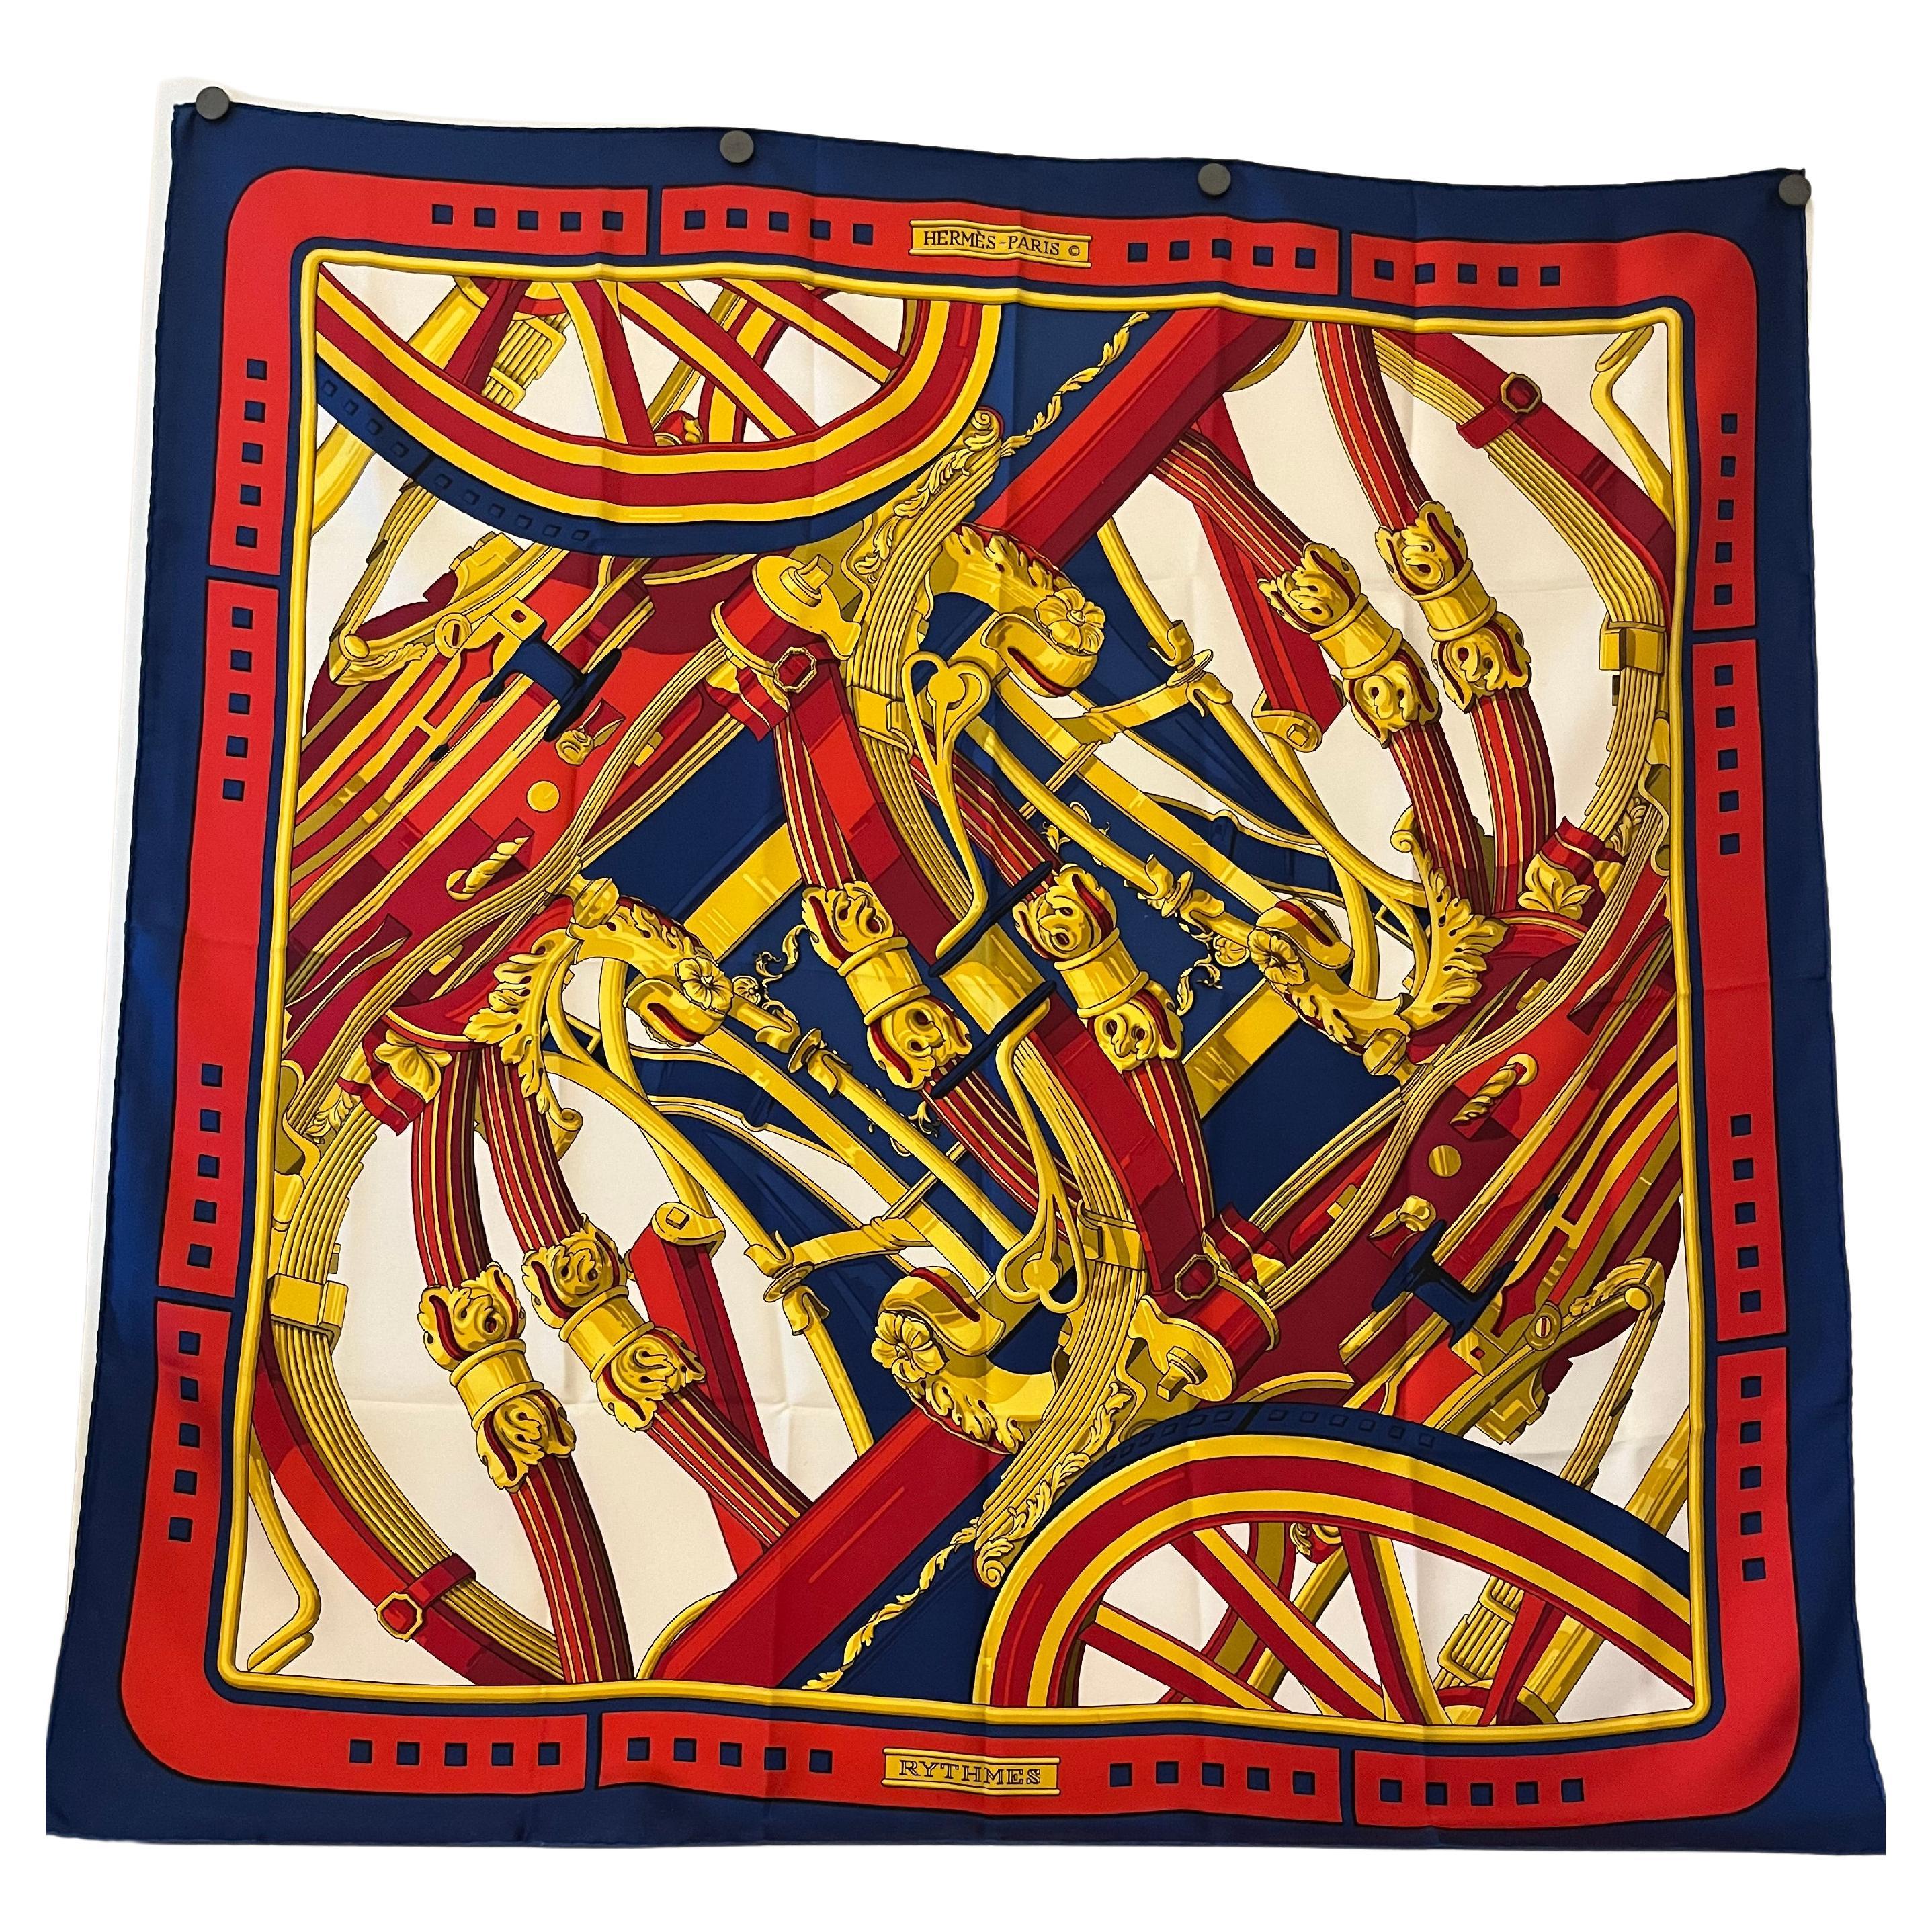 1970 Hermes "Rythmes" Silk Scarf By Cathy Latham For Sale